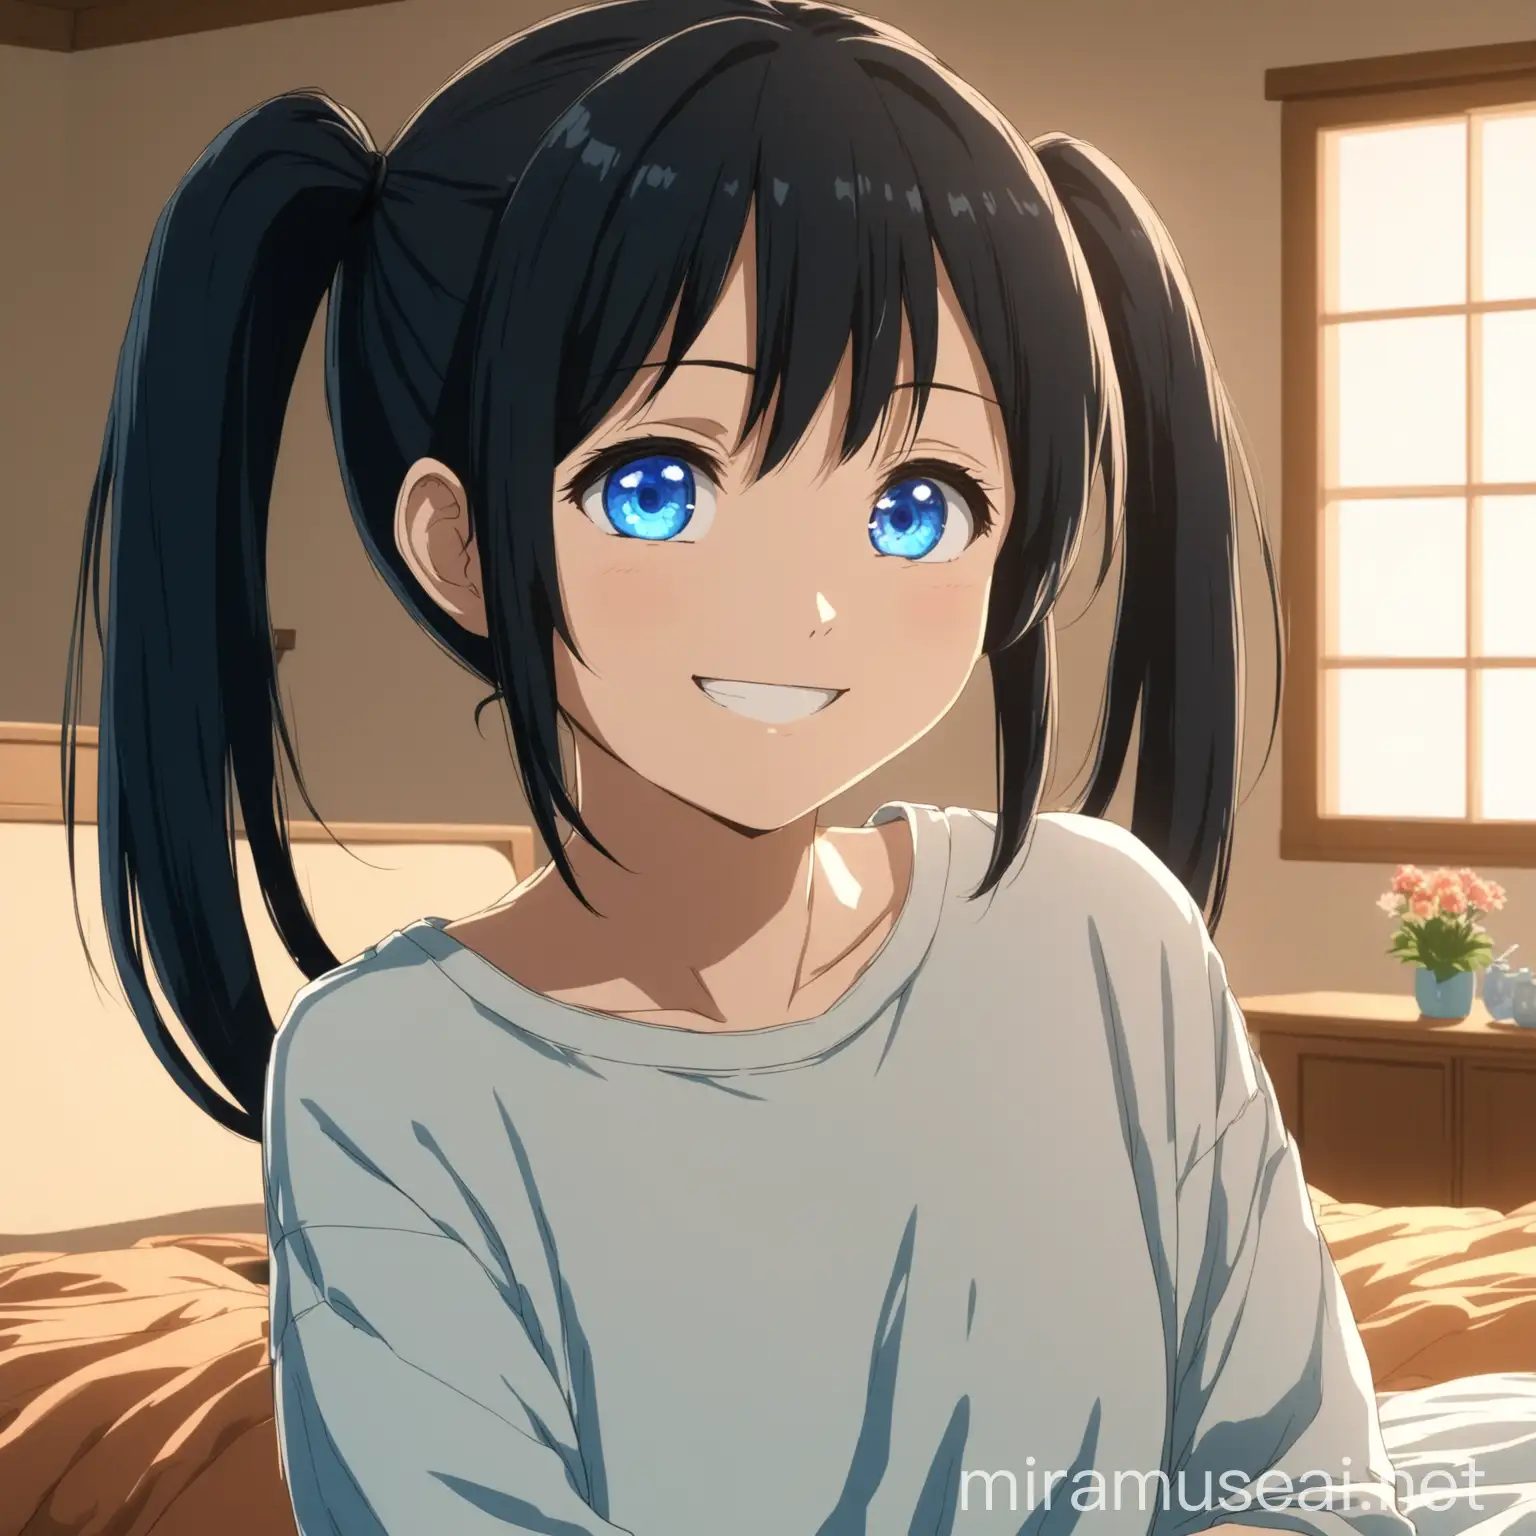 Gentle Smiling Anime Wife with Black Twintails and Blue Eyes at Home